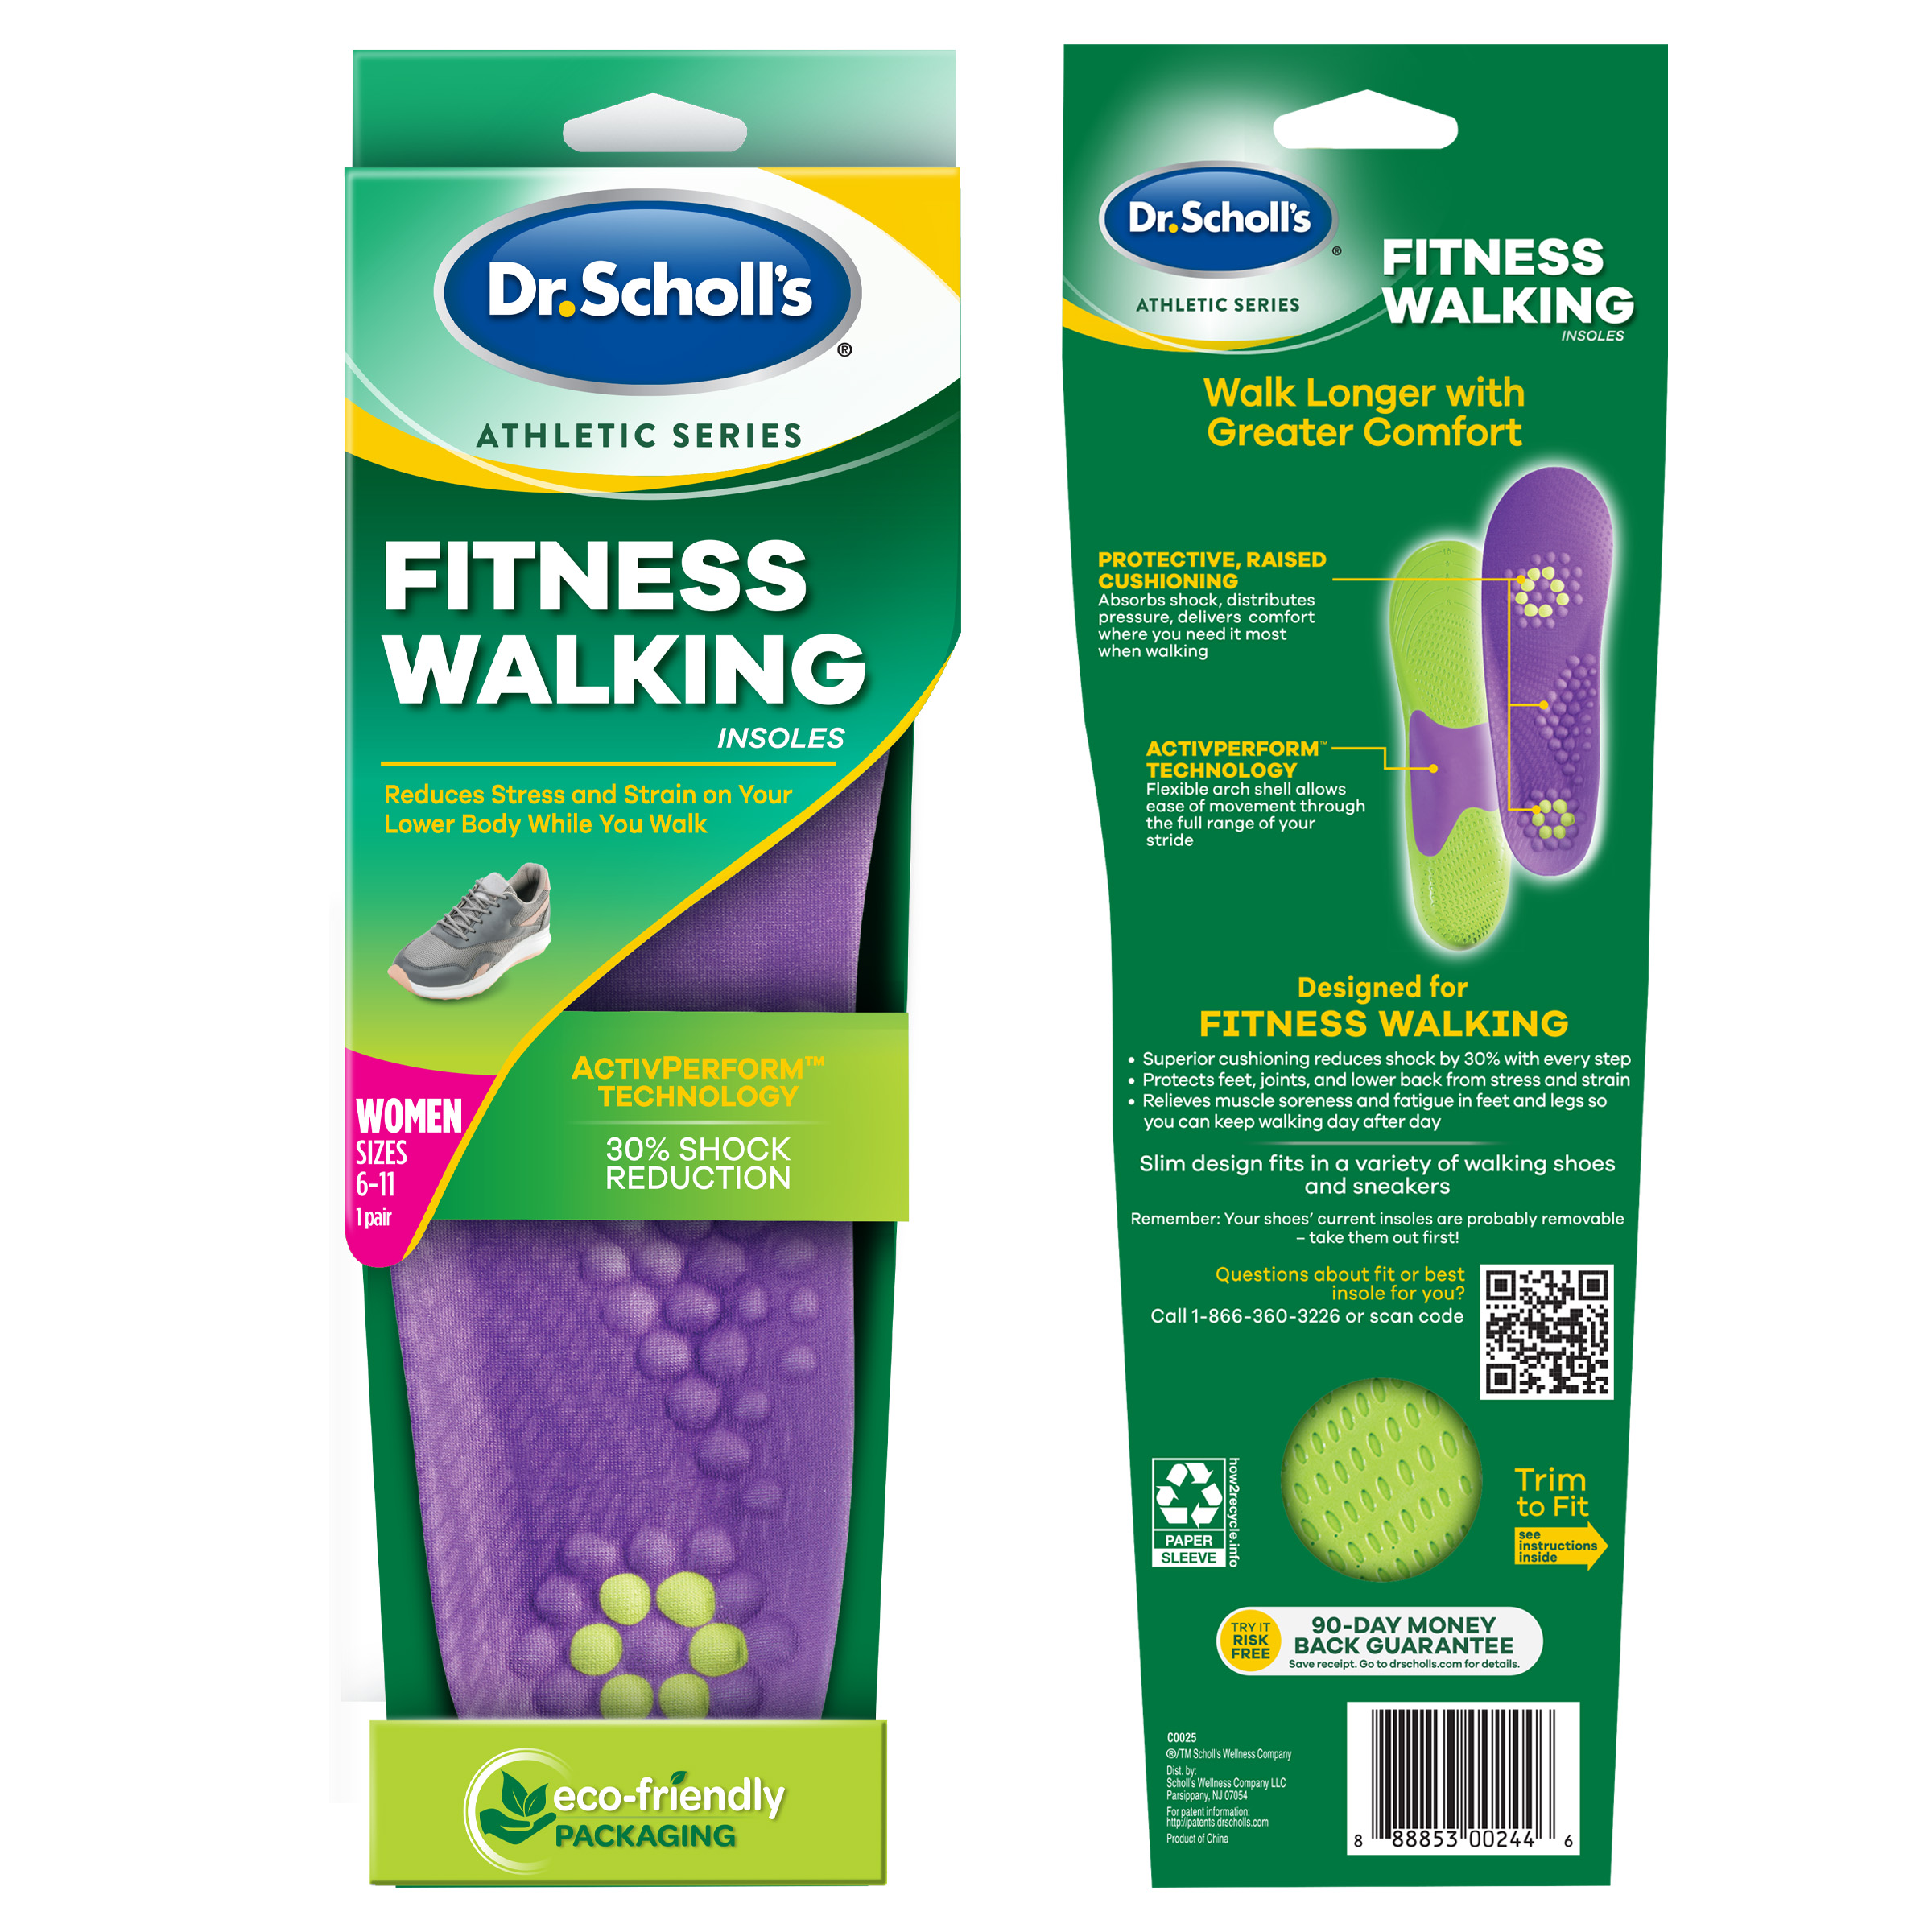 Dr. Scholl's Fitness Walking Insoles for Men (6-10) Inserts to Reduce Strain on your Lower Body - image 3 of 4